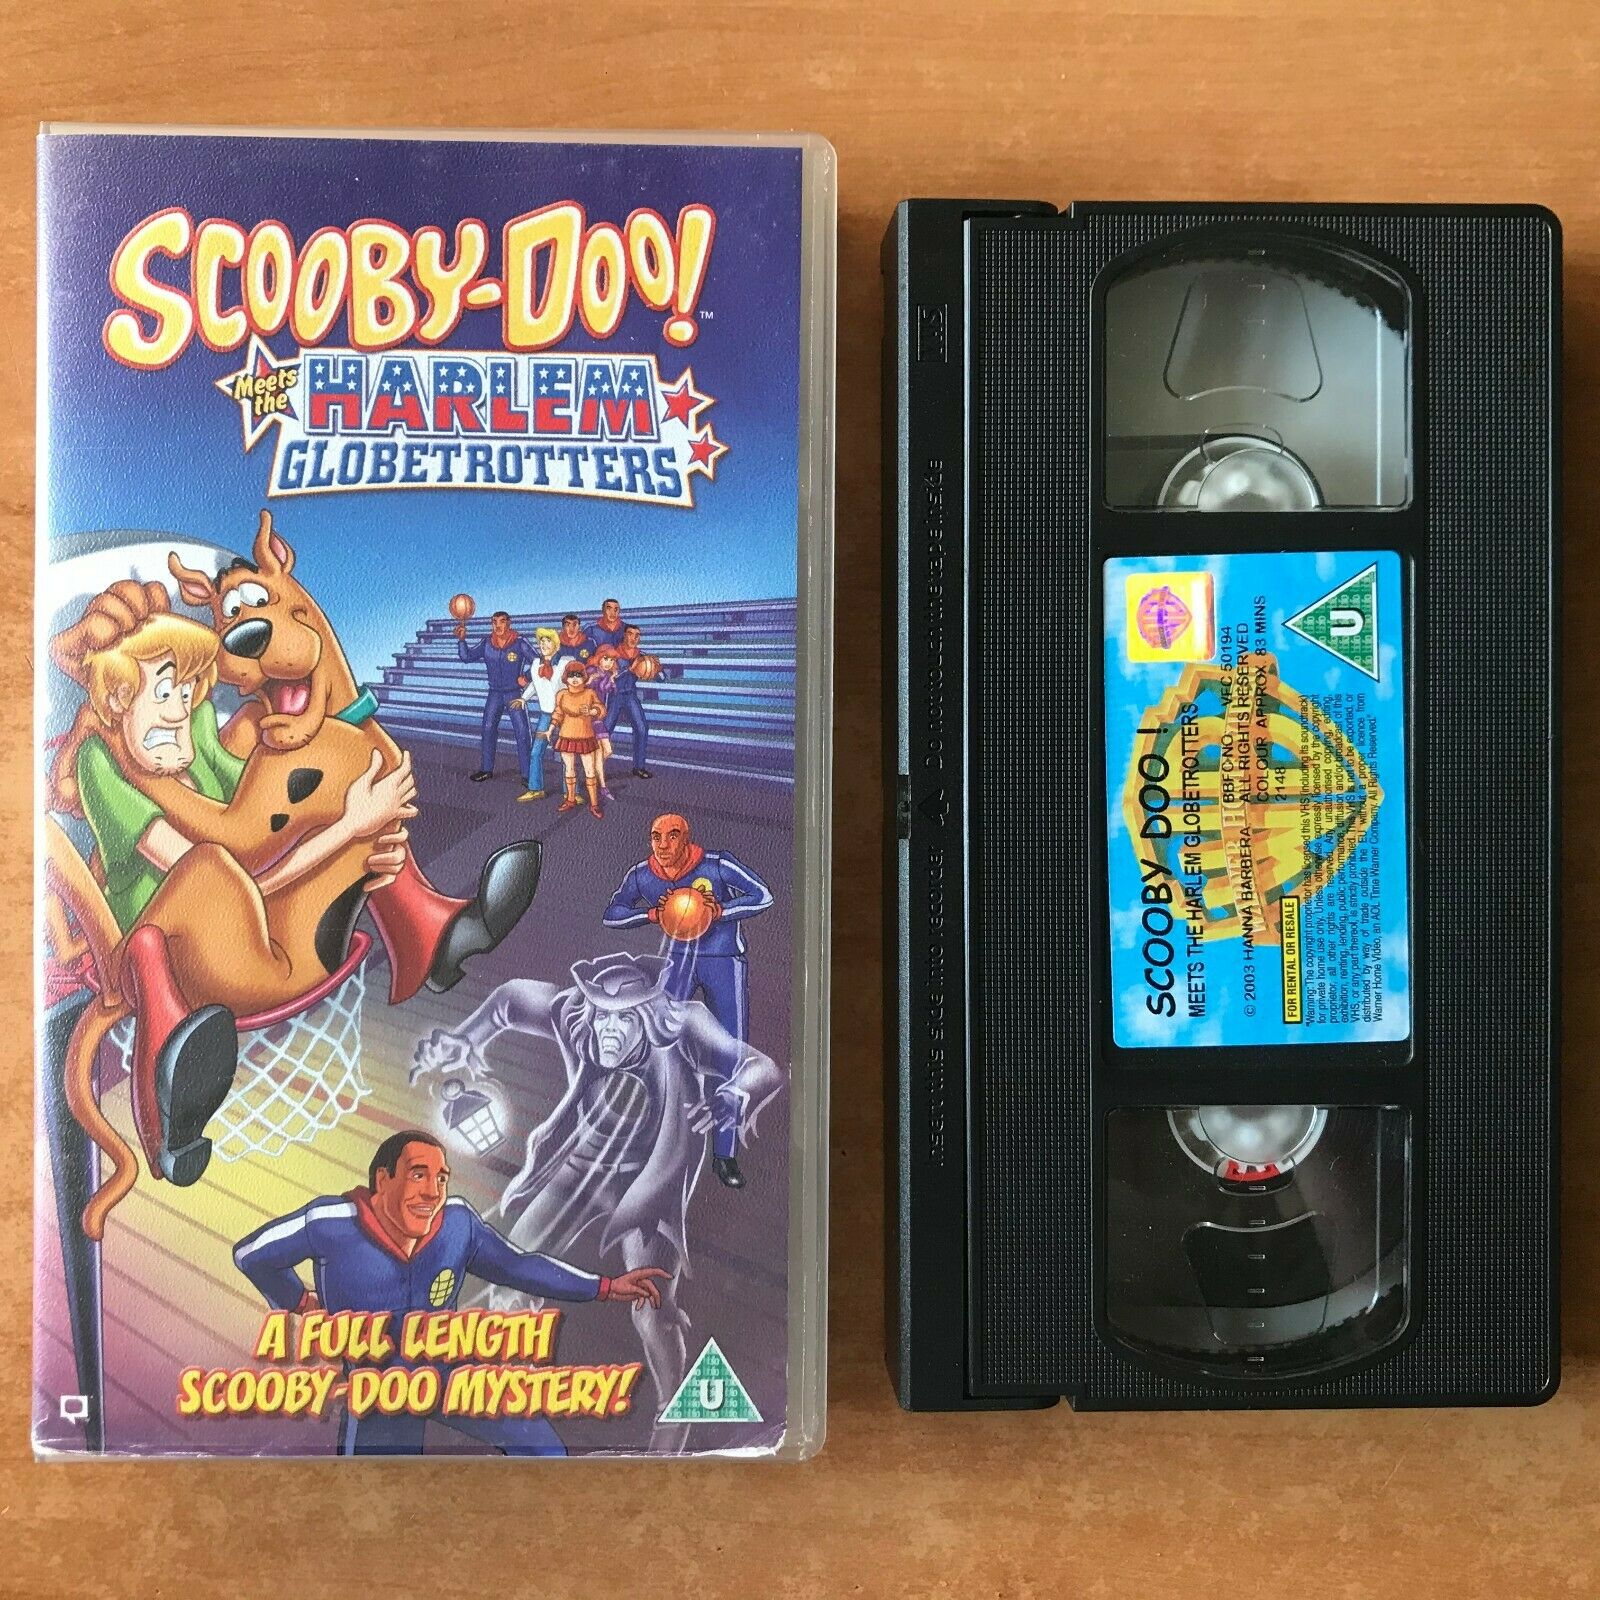 Scooby-Doo Meets Harlem Globetrotters - Animated [Rental] Children's - Pal VHS-